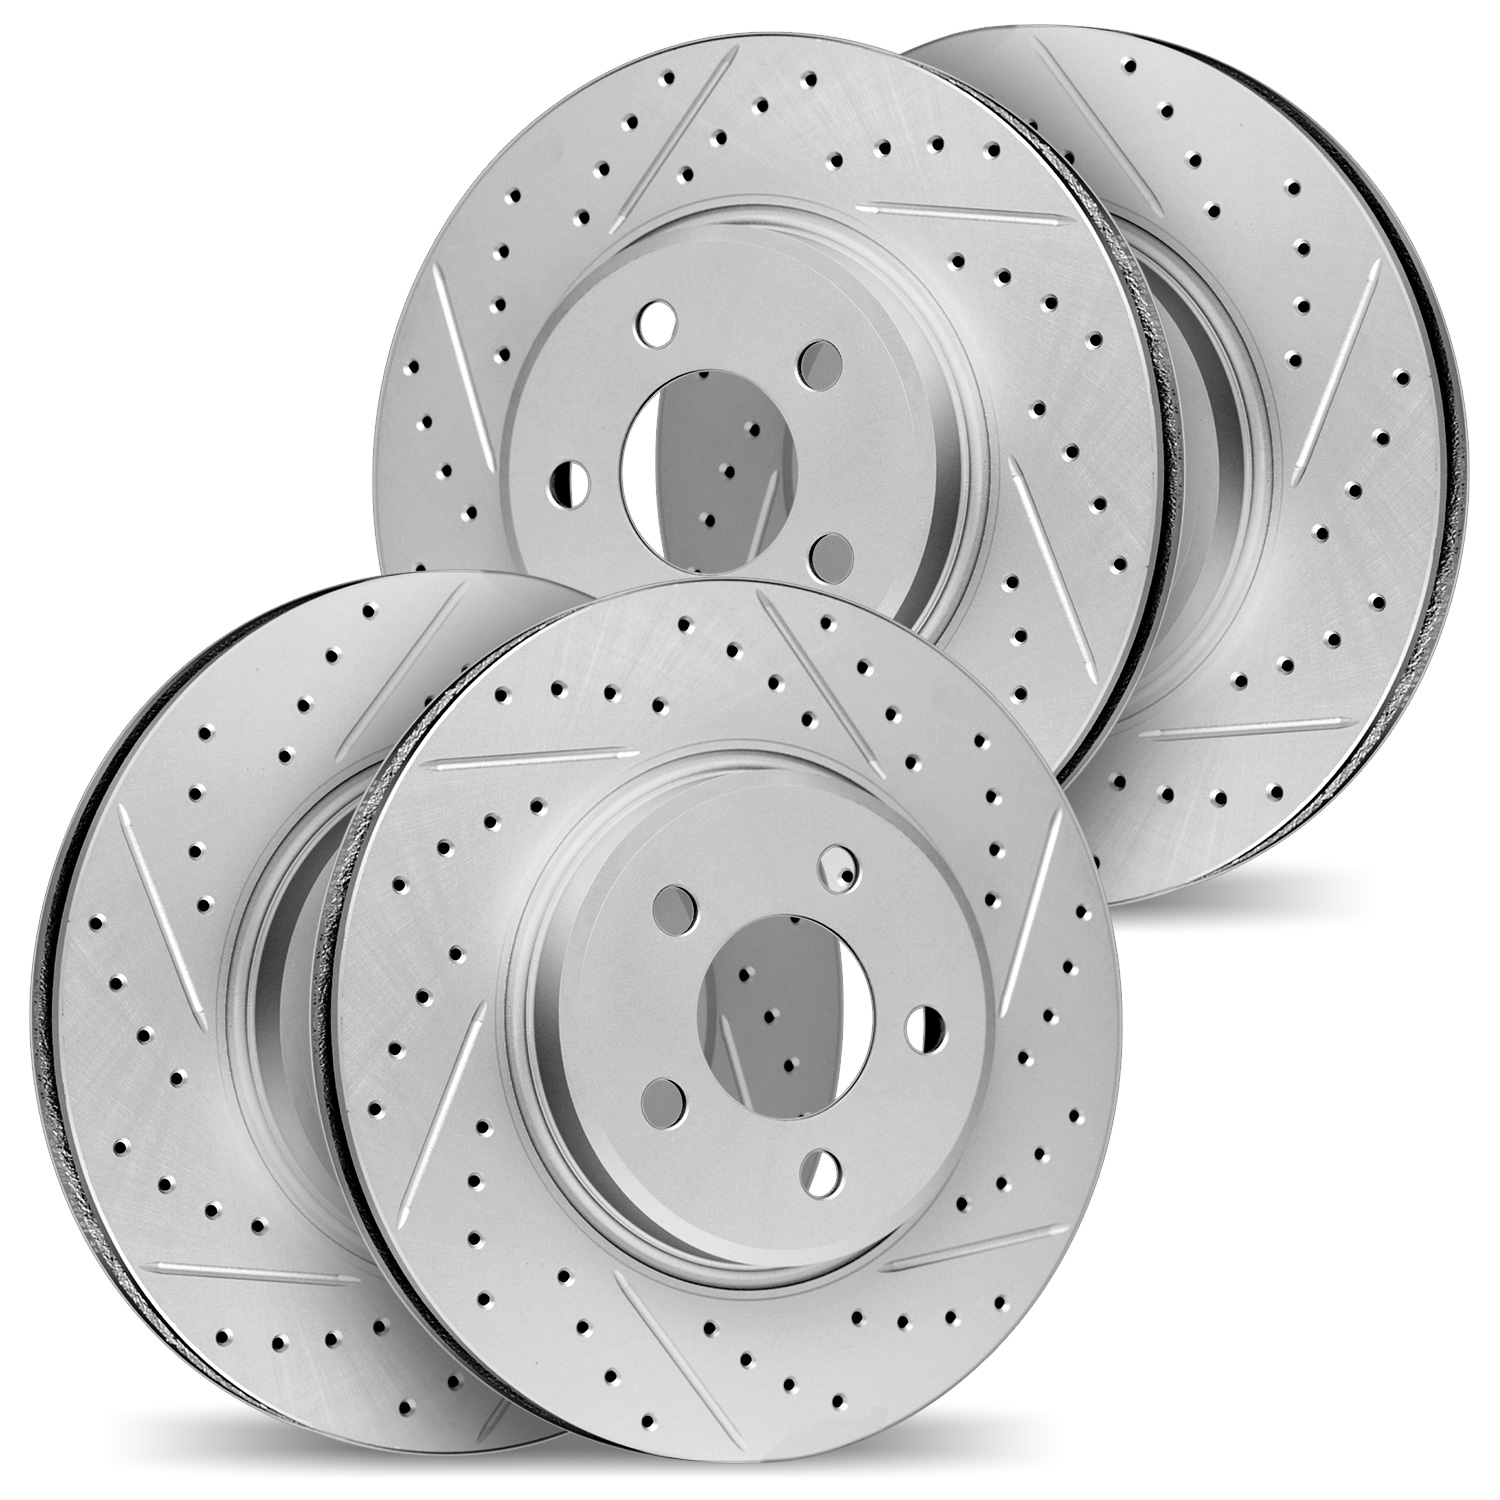 2004-75018 Geoperformance Drilled/Slotted Brake Rotors, 2001-2006 Lexus/Toyota/Scion, Position: Front and Rear